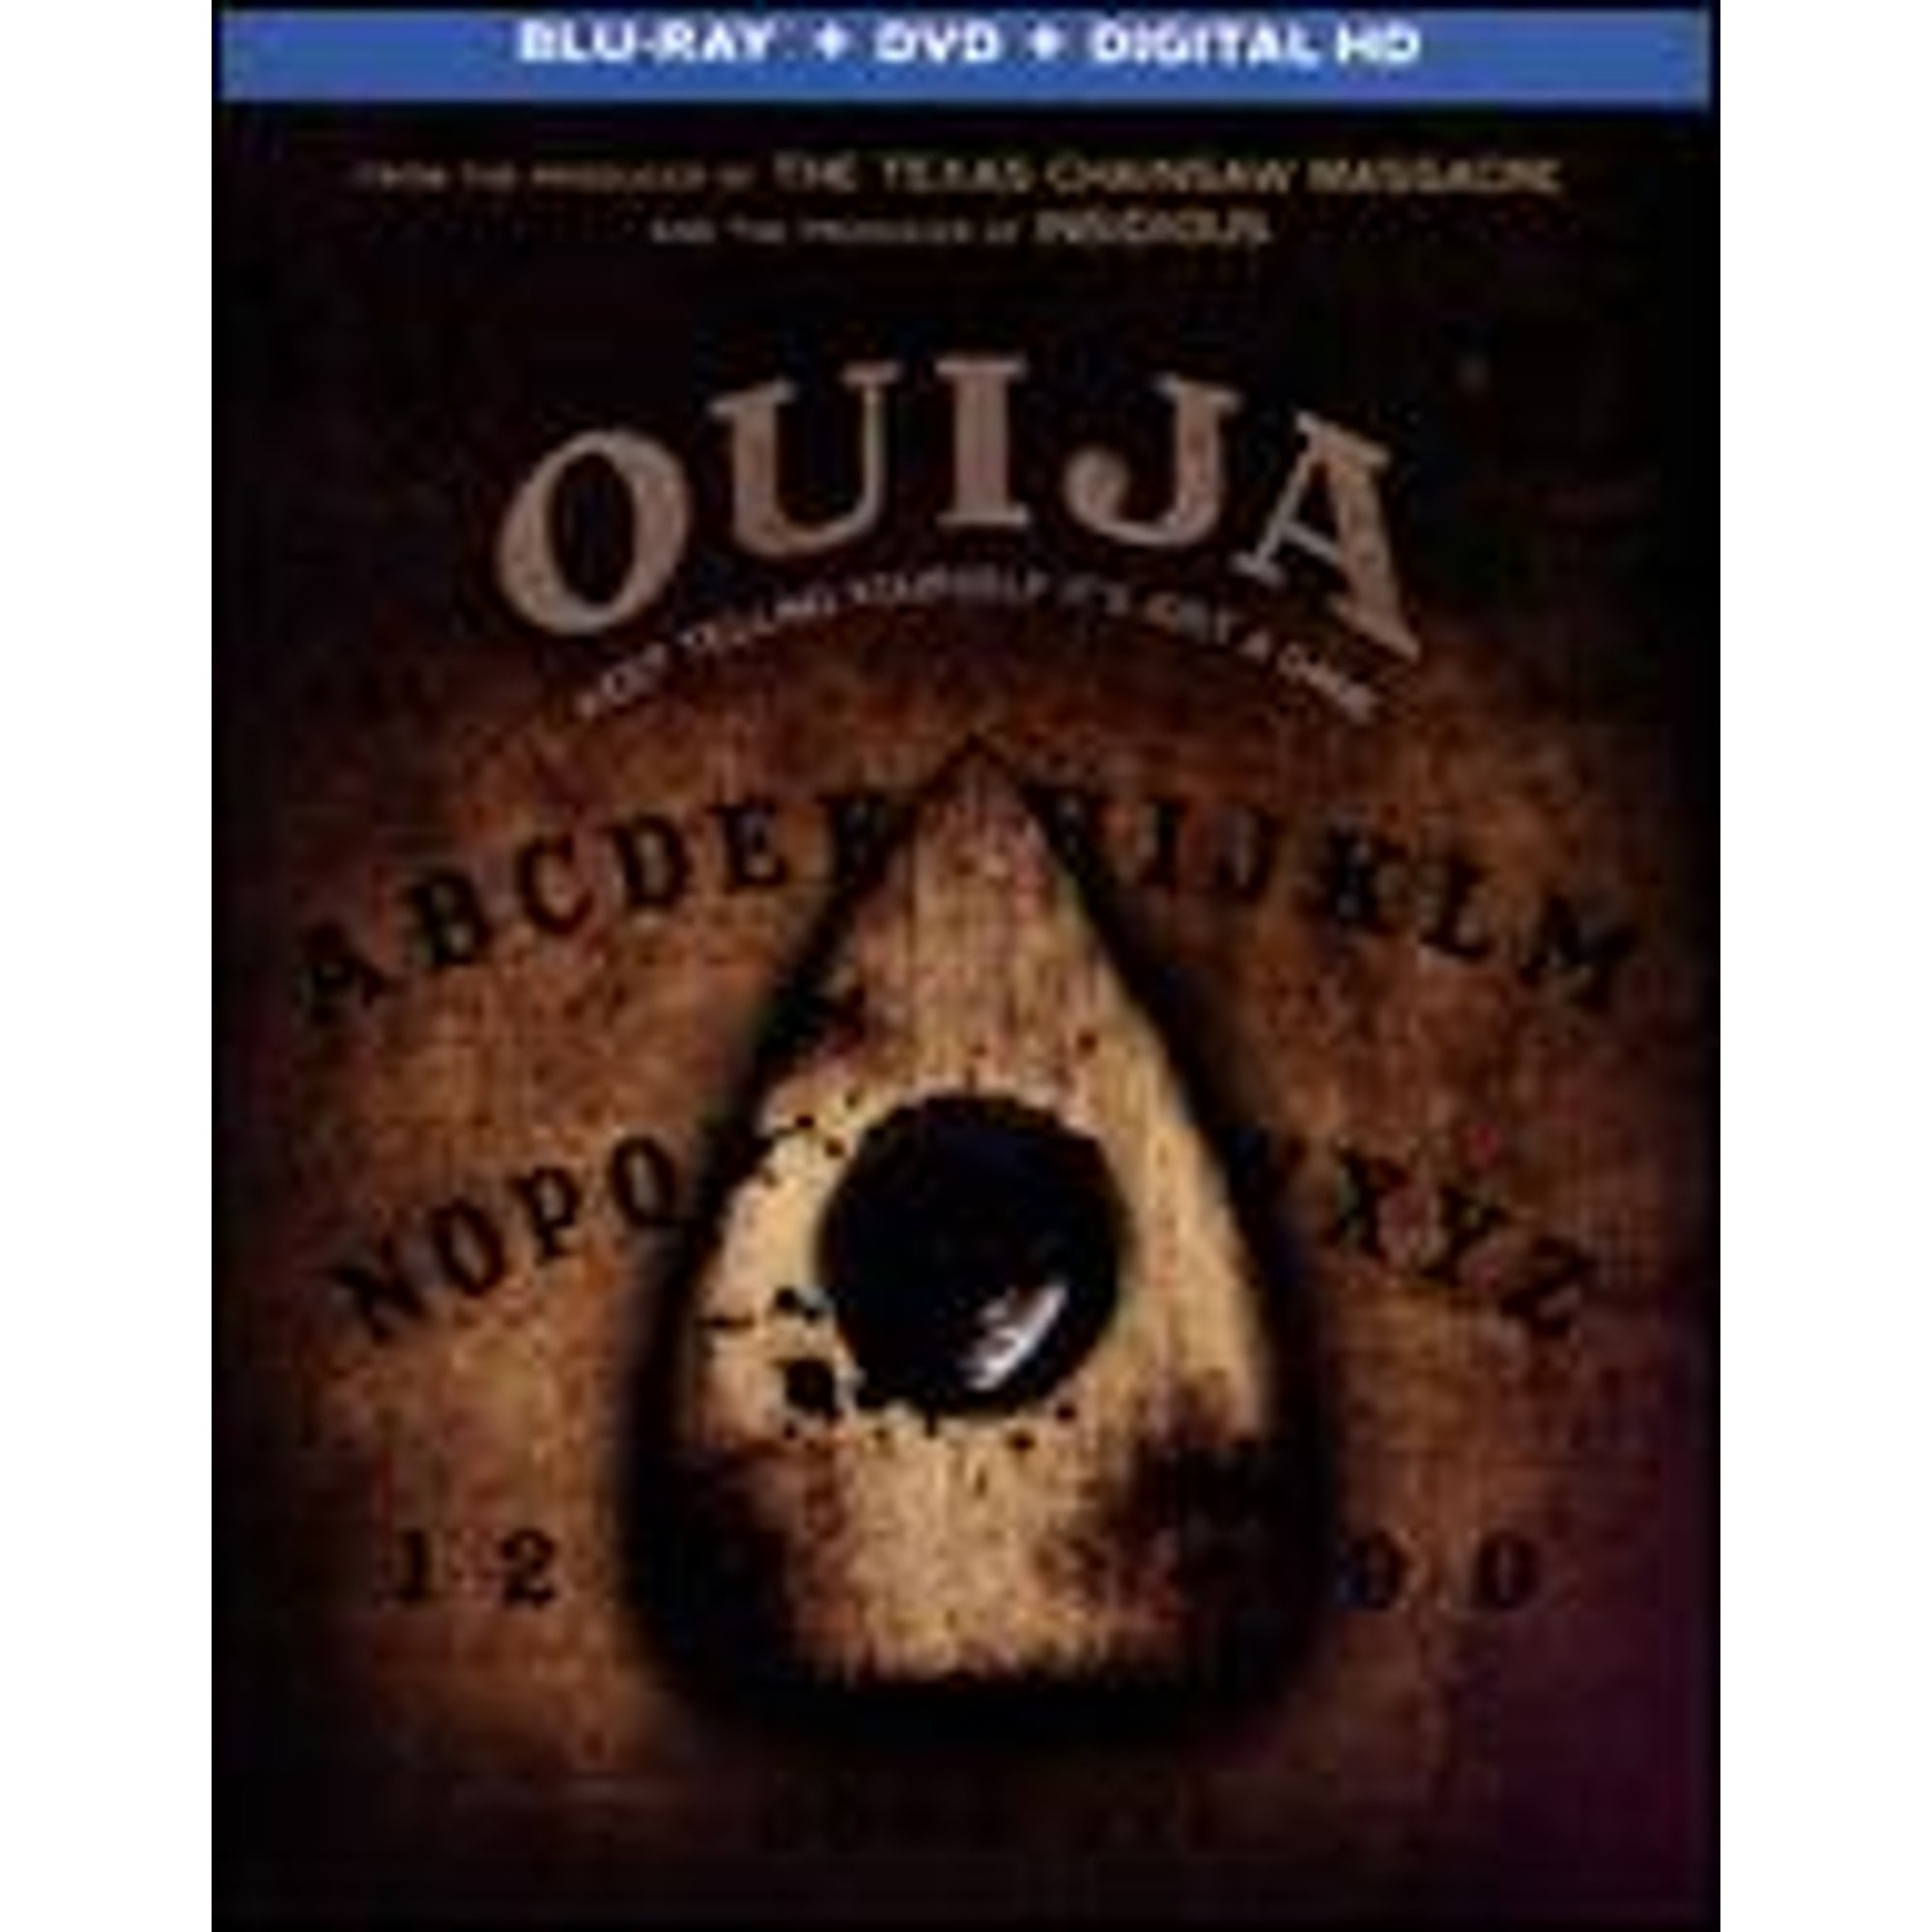 Ouija [2 Discs] [Includes Digital Copy] [Blu-ray/DVD] (Pre-Owned Blu-Ray  0025192123641) directed by Stiles White